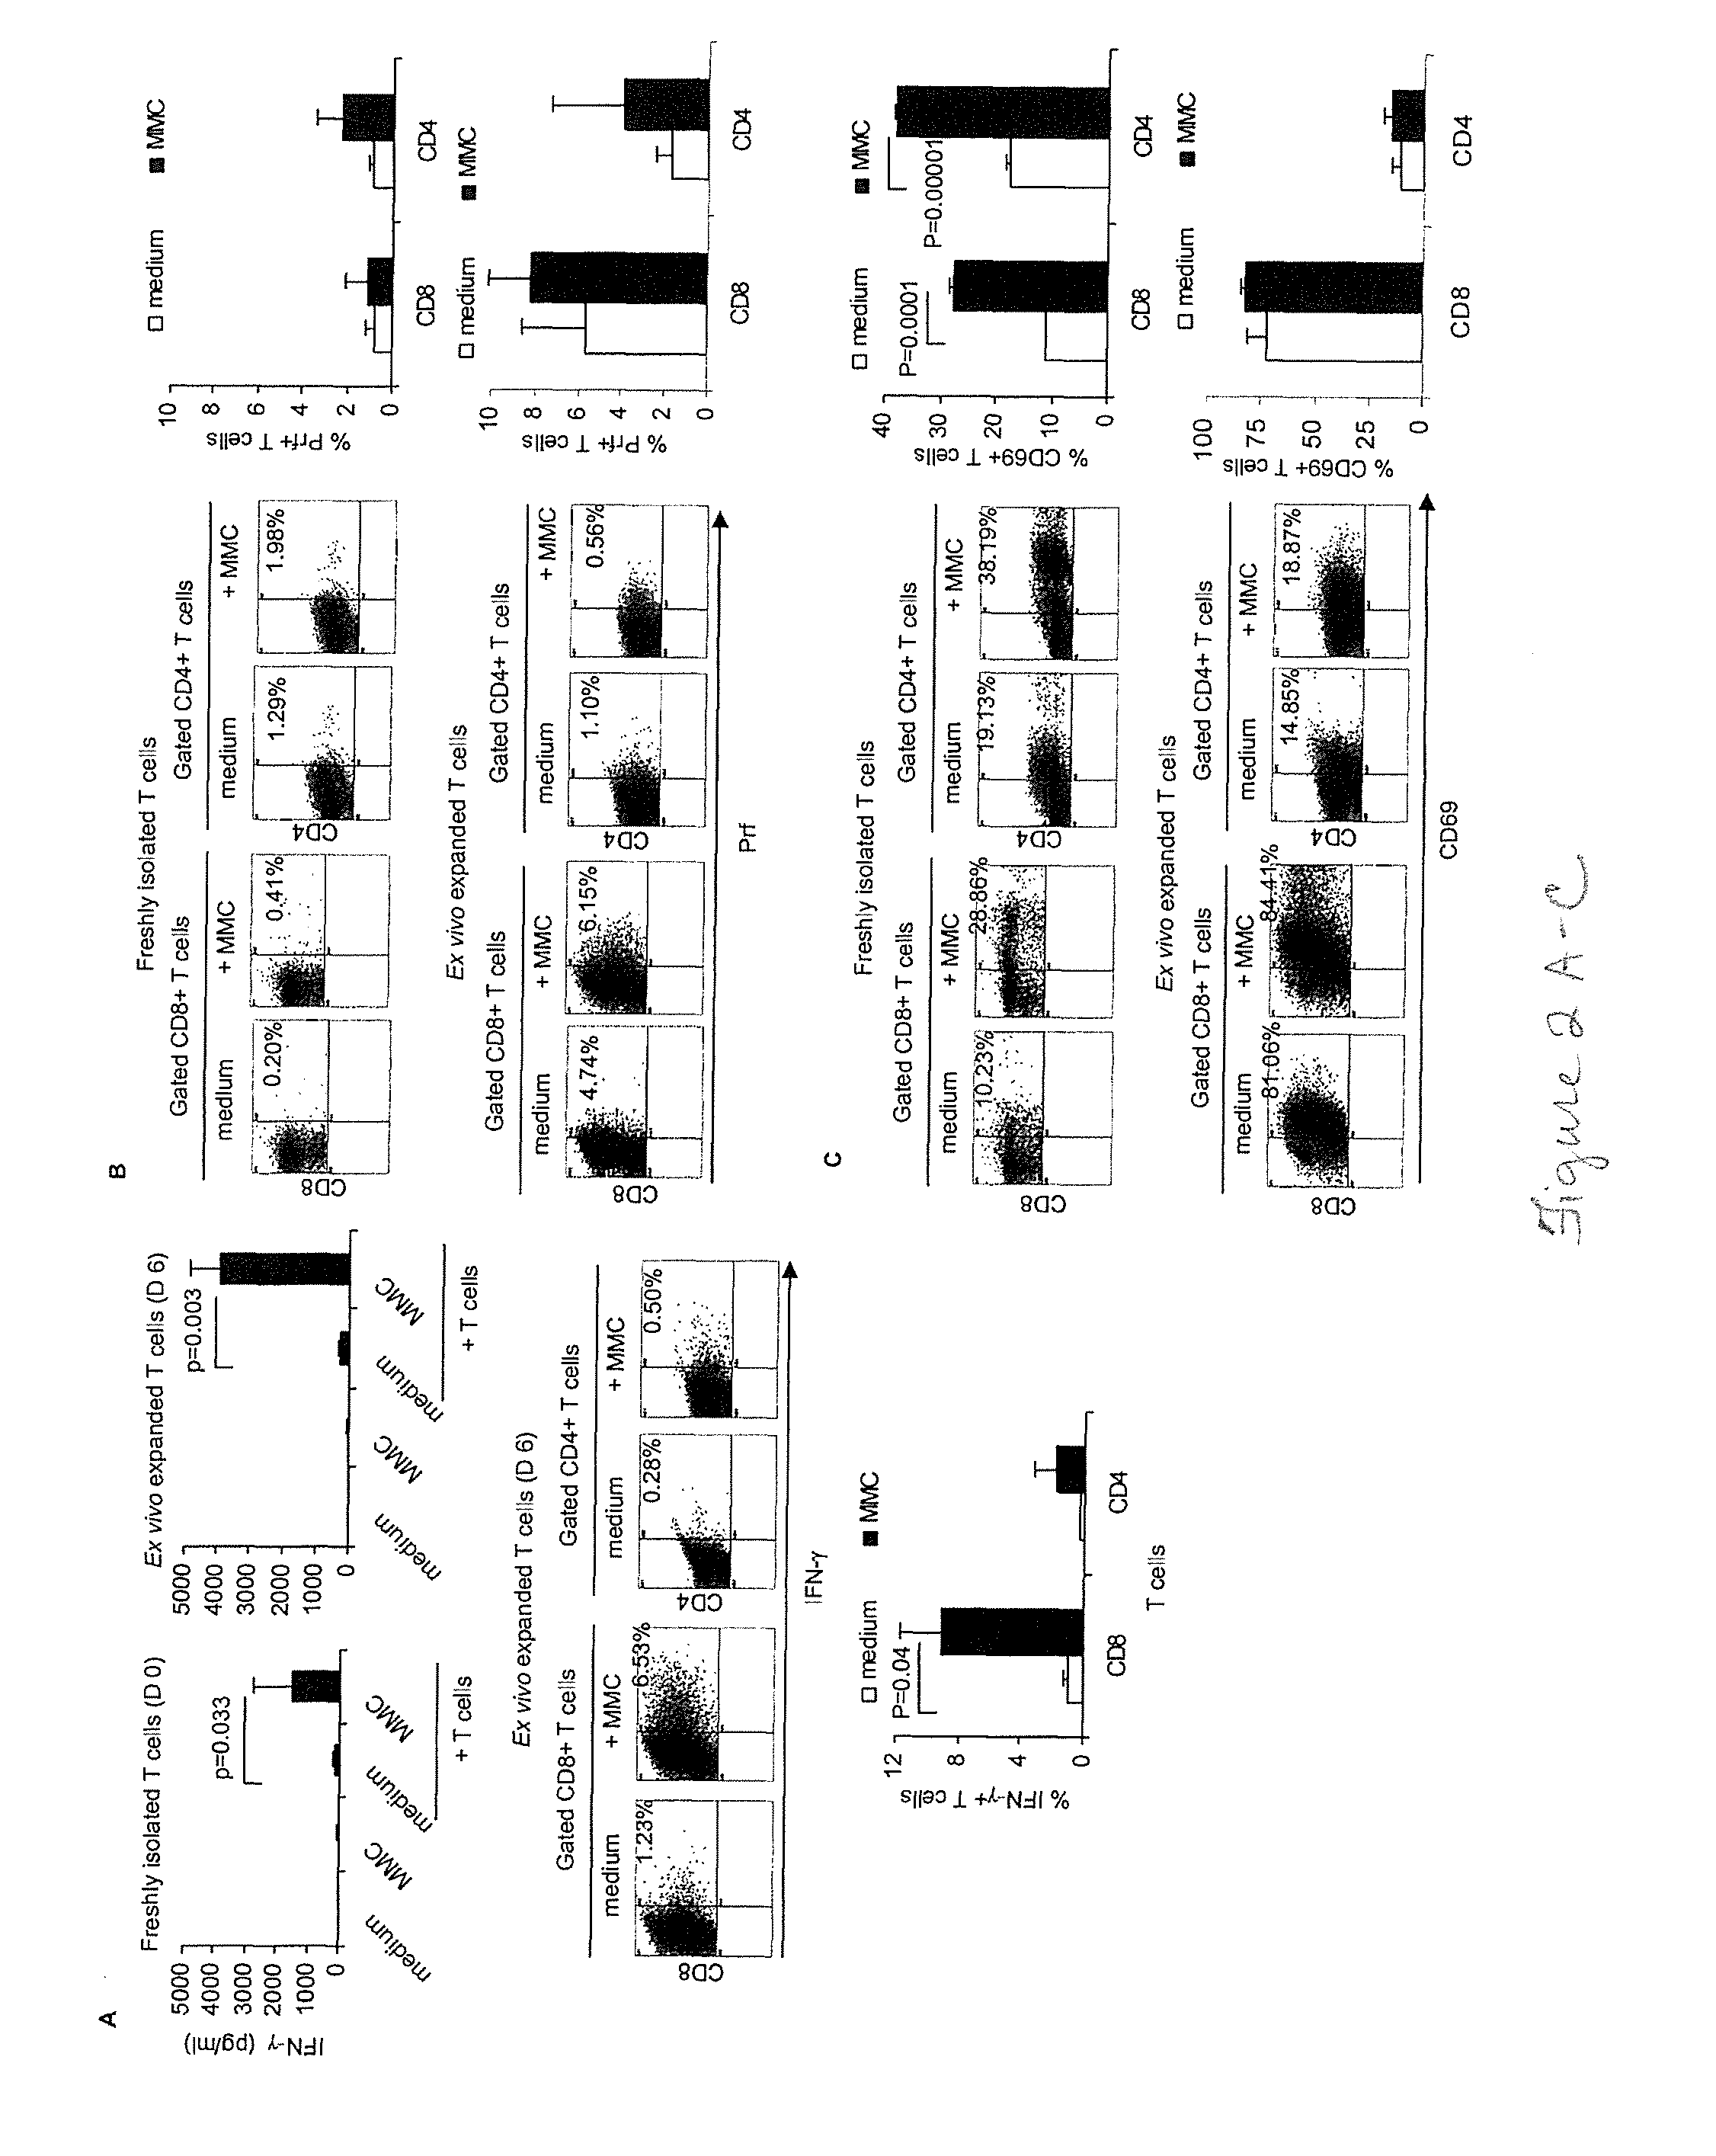 Composition and method for immunological treatment of cancer, prevention of cancer recurrence and metastasis, and overcoming immune suppresor cells